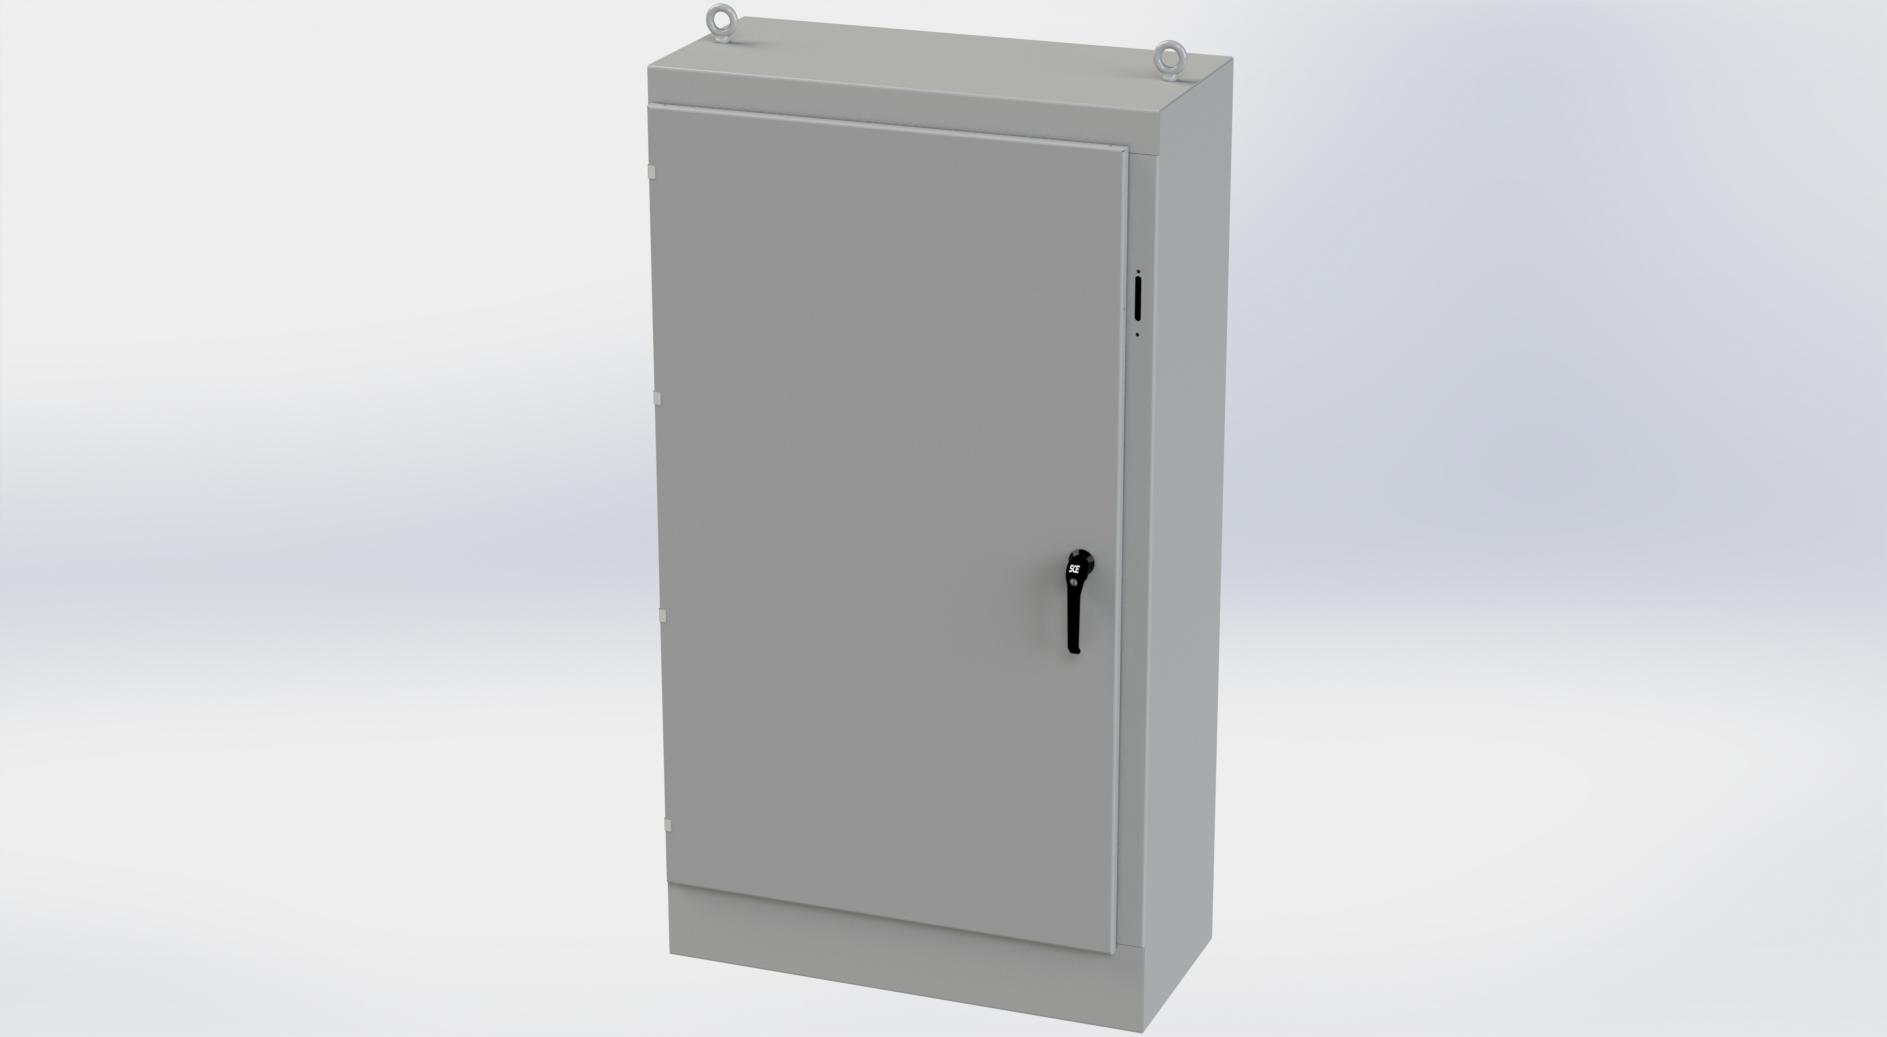 Saginaw Control SCE-72XM4018 1DR XM Enclosure, Height:72.00", Width:39.50", Depth:18.00", ANSI-61 gray powder coating inside and out. Sub-panels are powder coated white.  